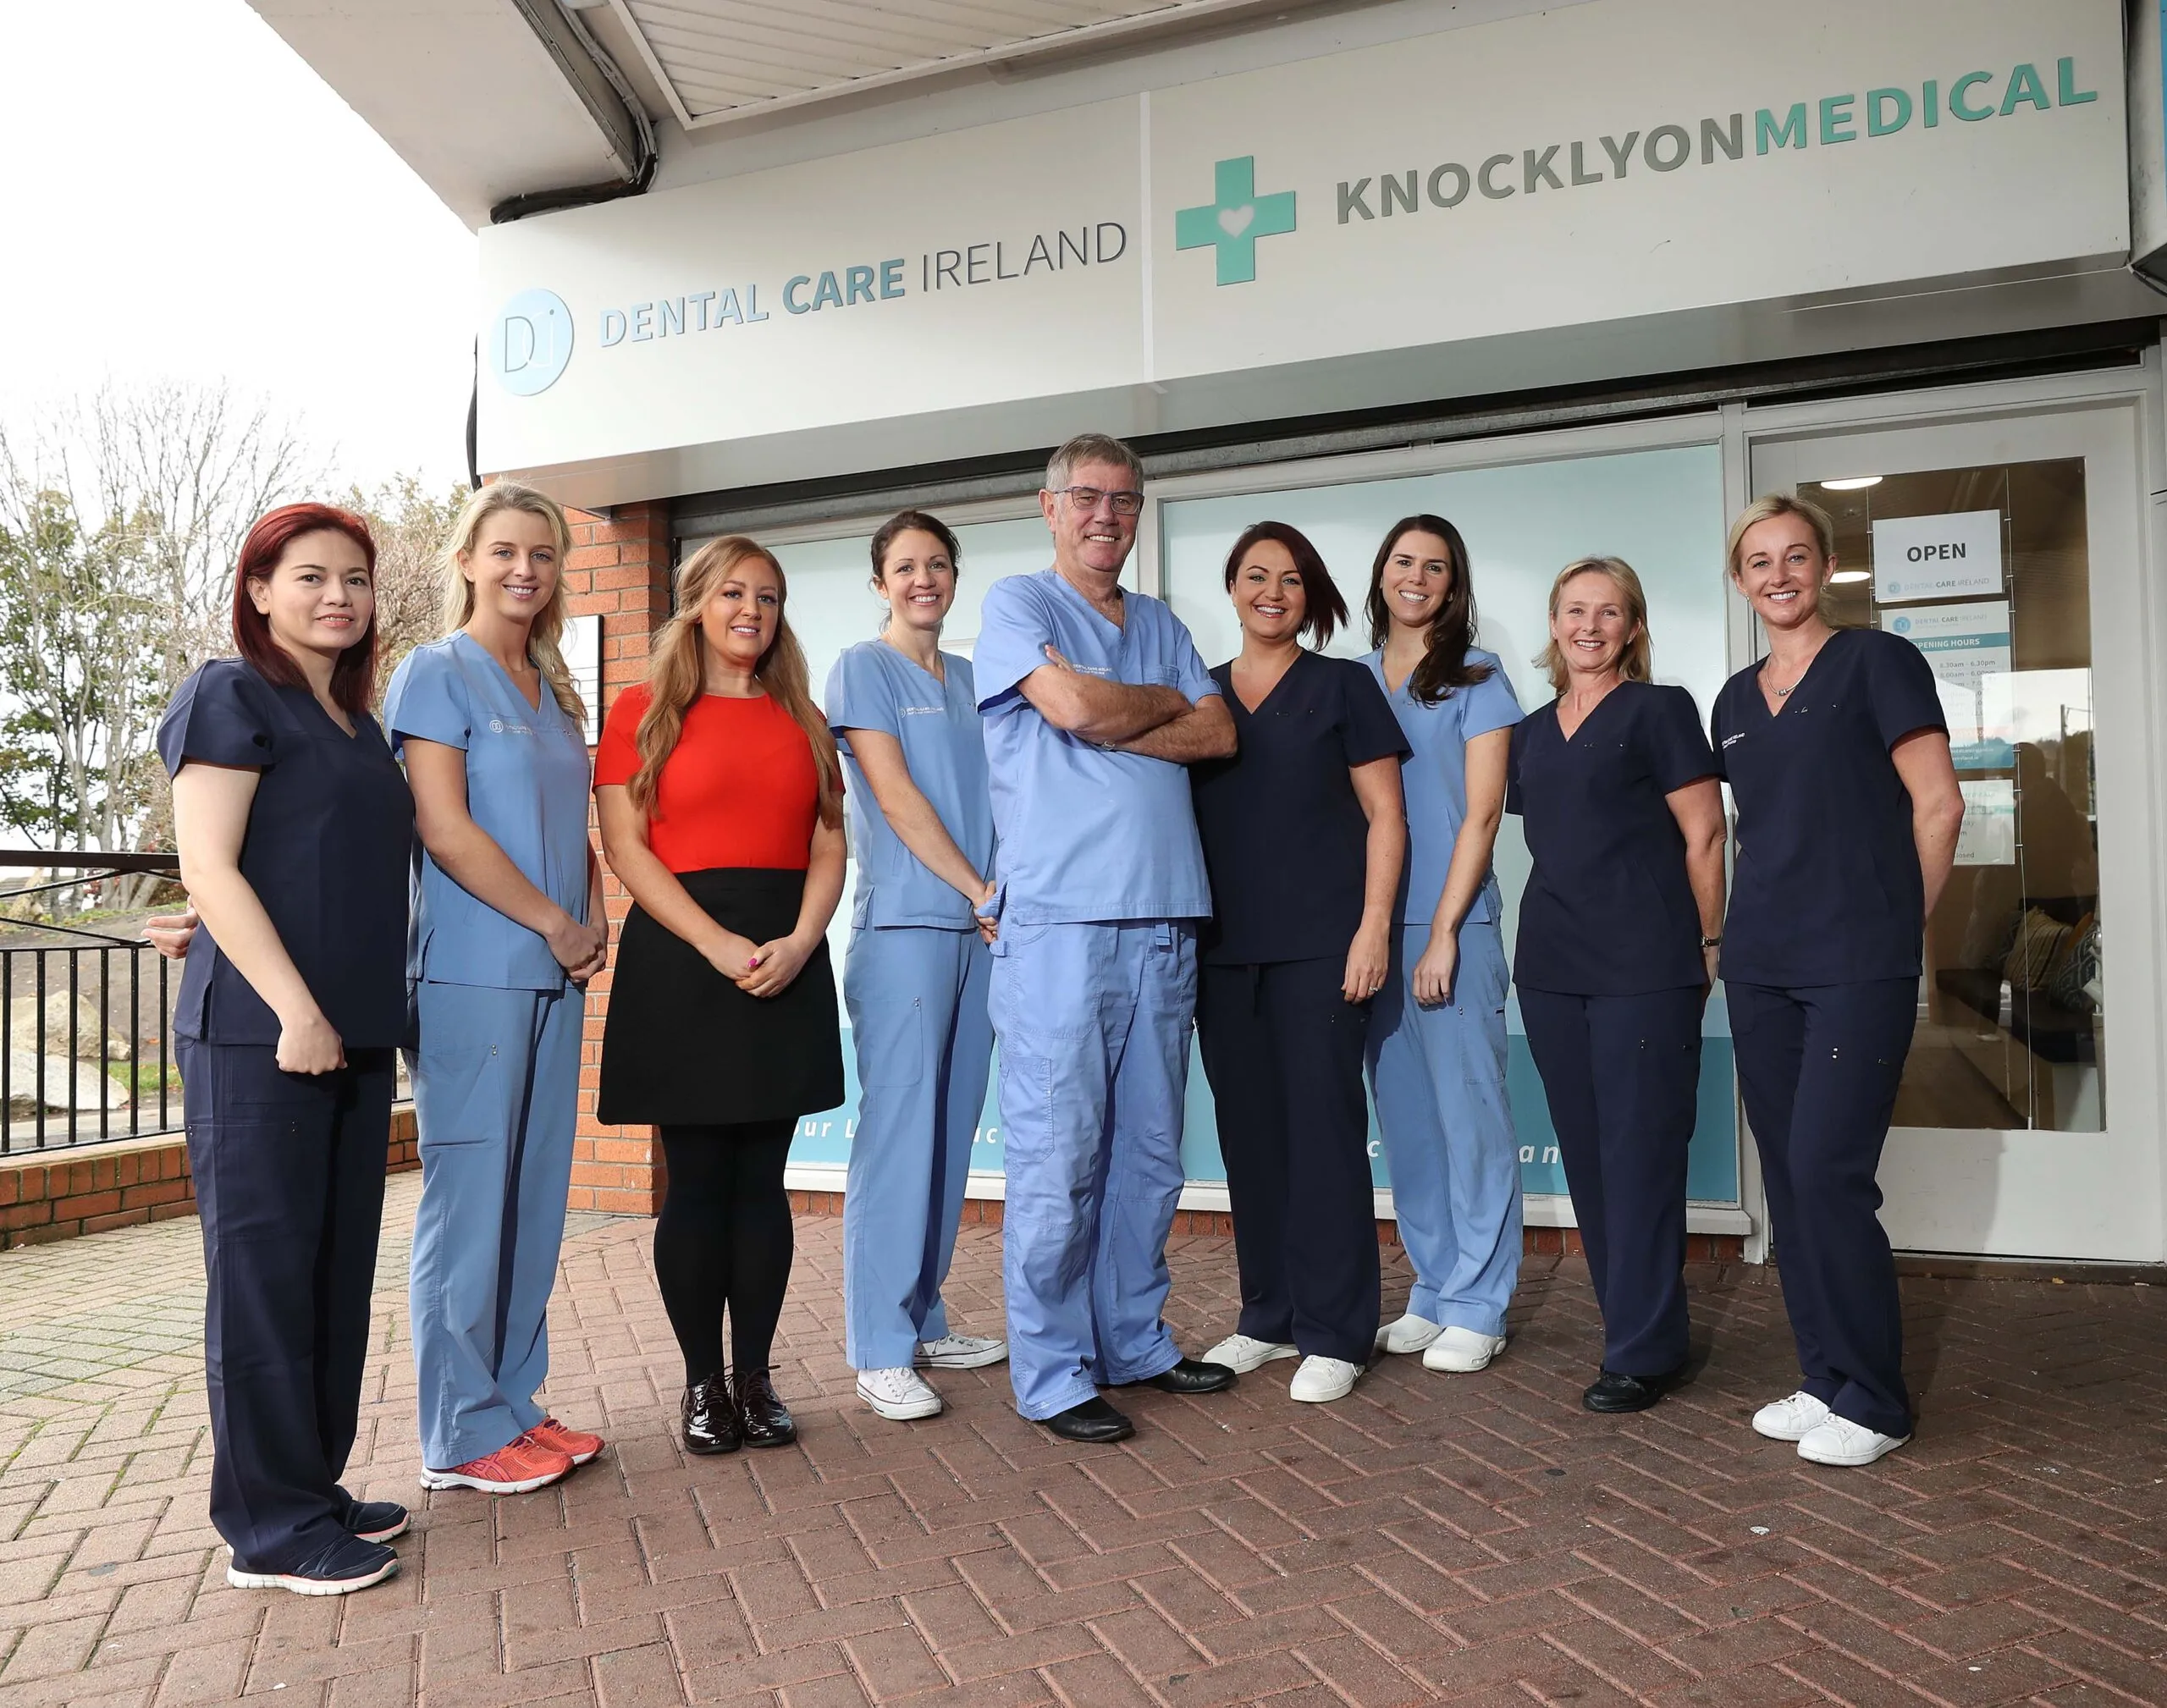 Dental Care Ireland Knocklyon practice manager, Finnola Jones, discusses how a recent makeover has made a huge difference for this dentist in Knocklyon.